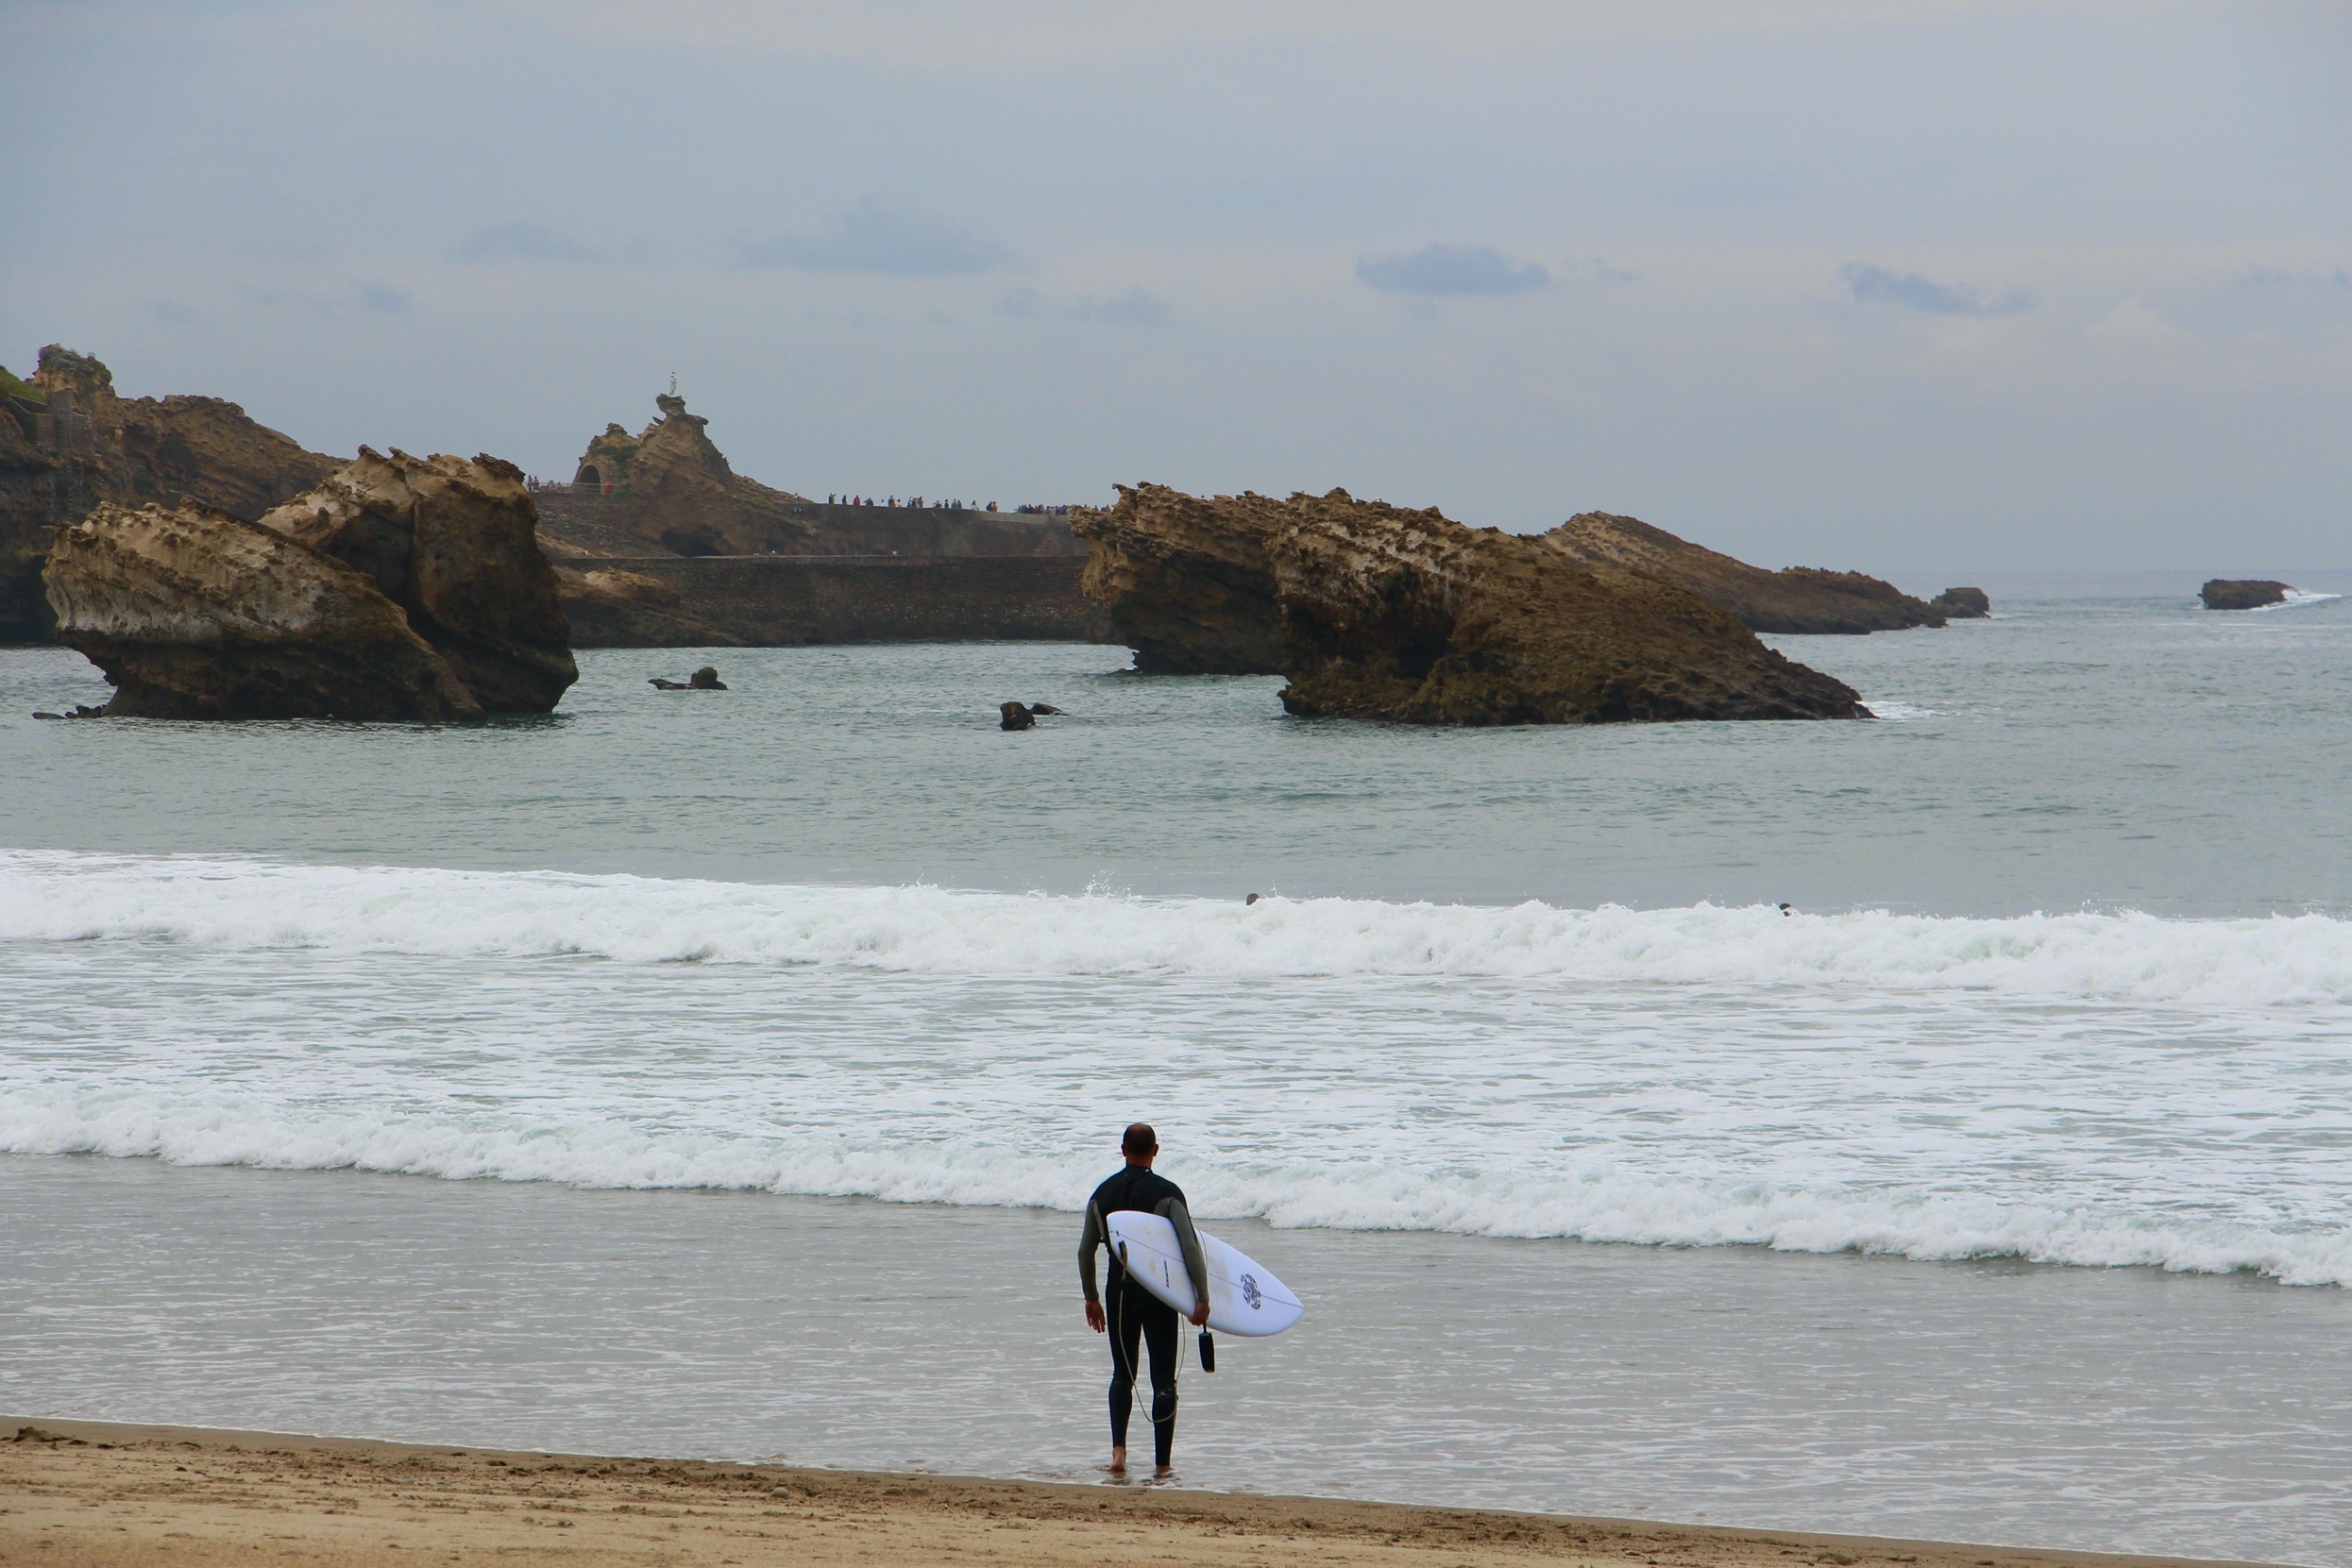 A surfer looking into the ocean in Biarritz, France.